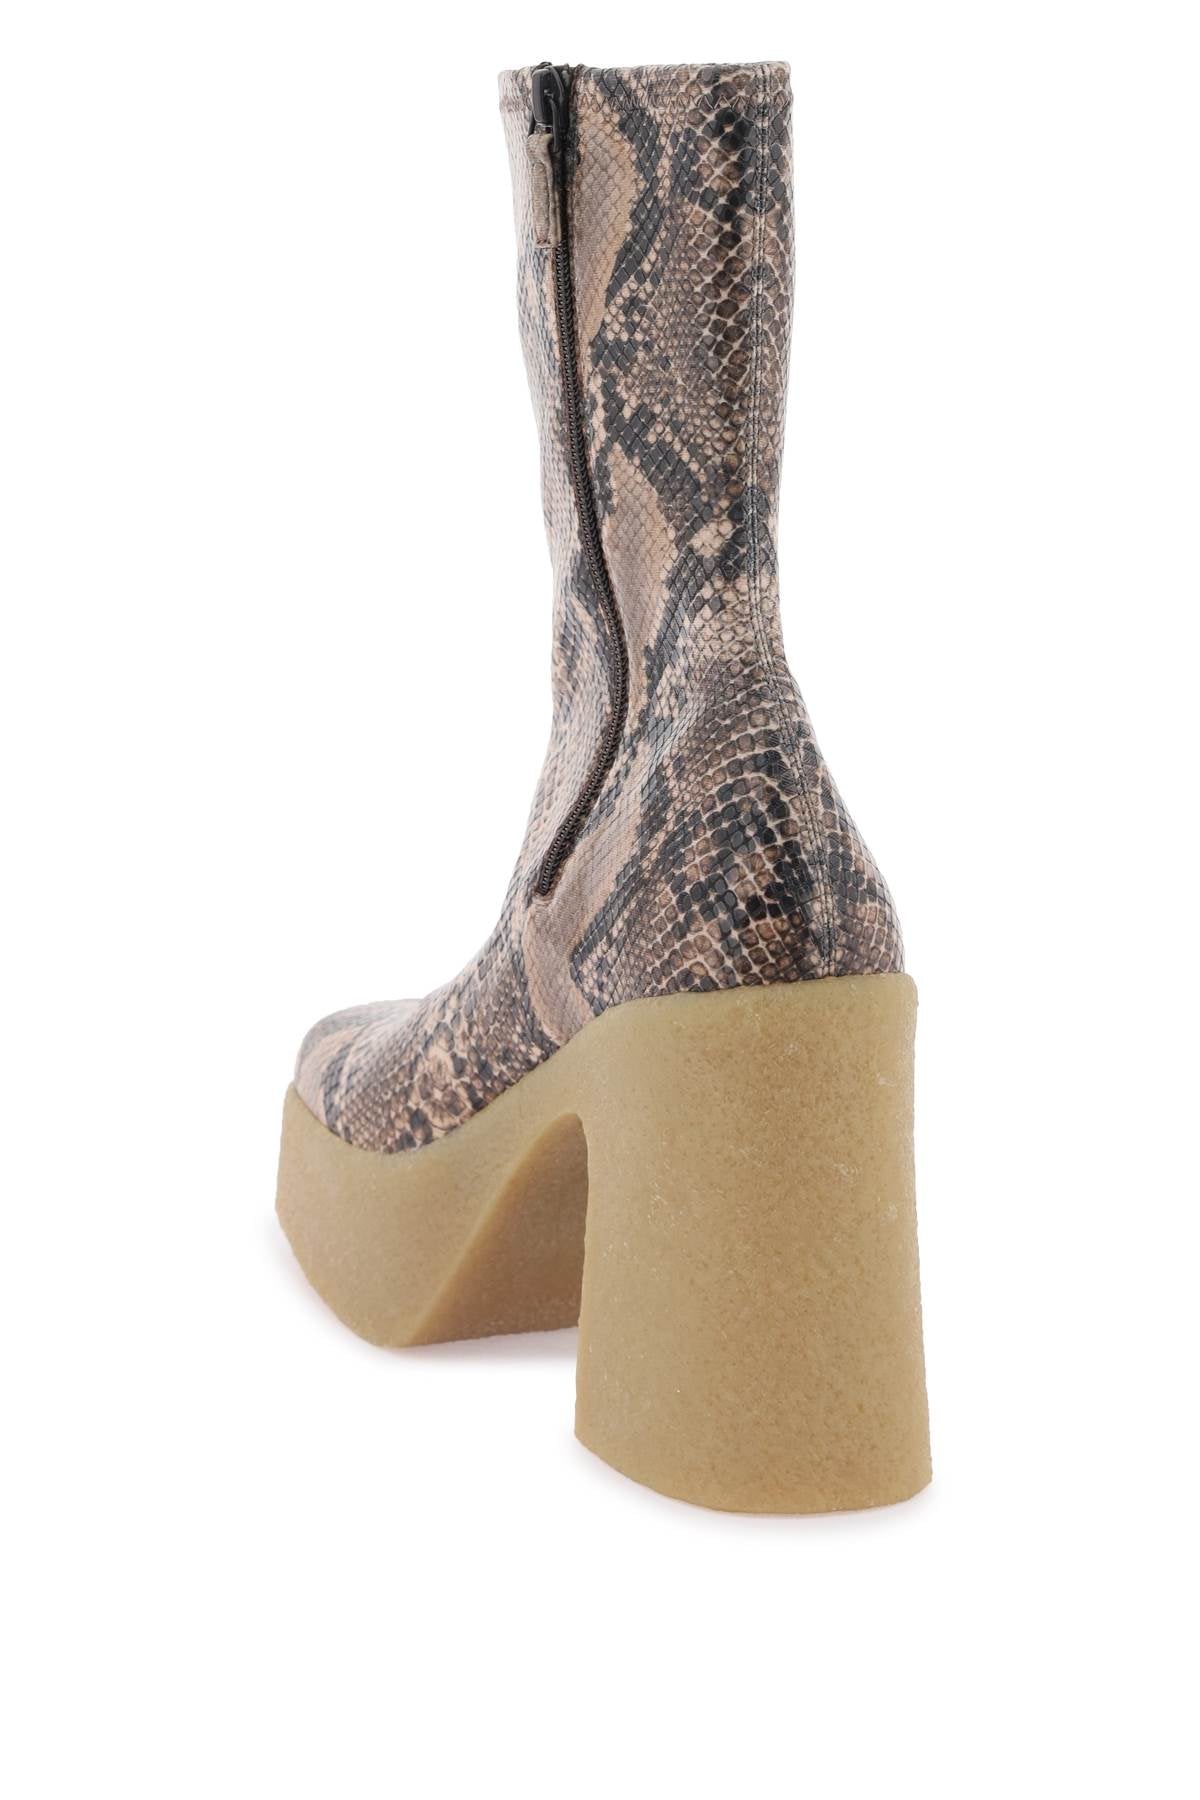 2007 STELLA MCCARTNEY  SKYLA WEDGE ANKLE BOOTS IN ALTER PYTHON